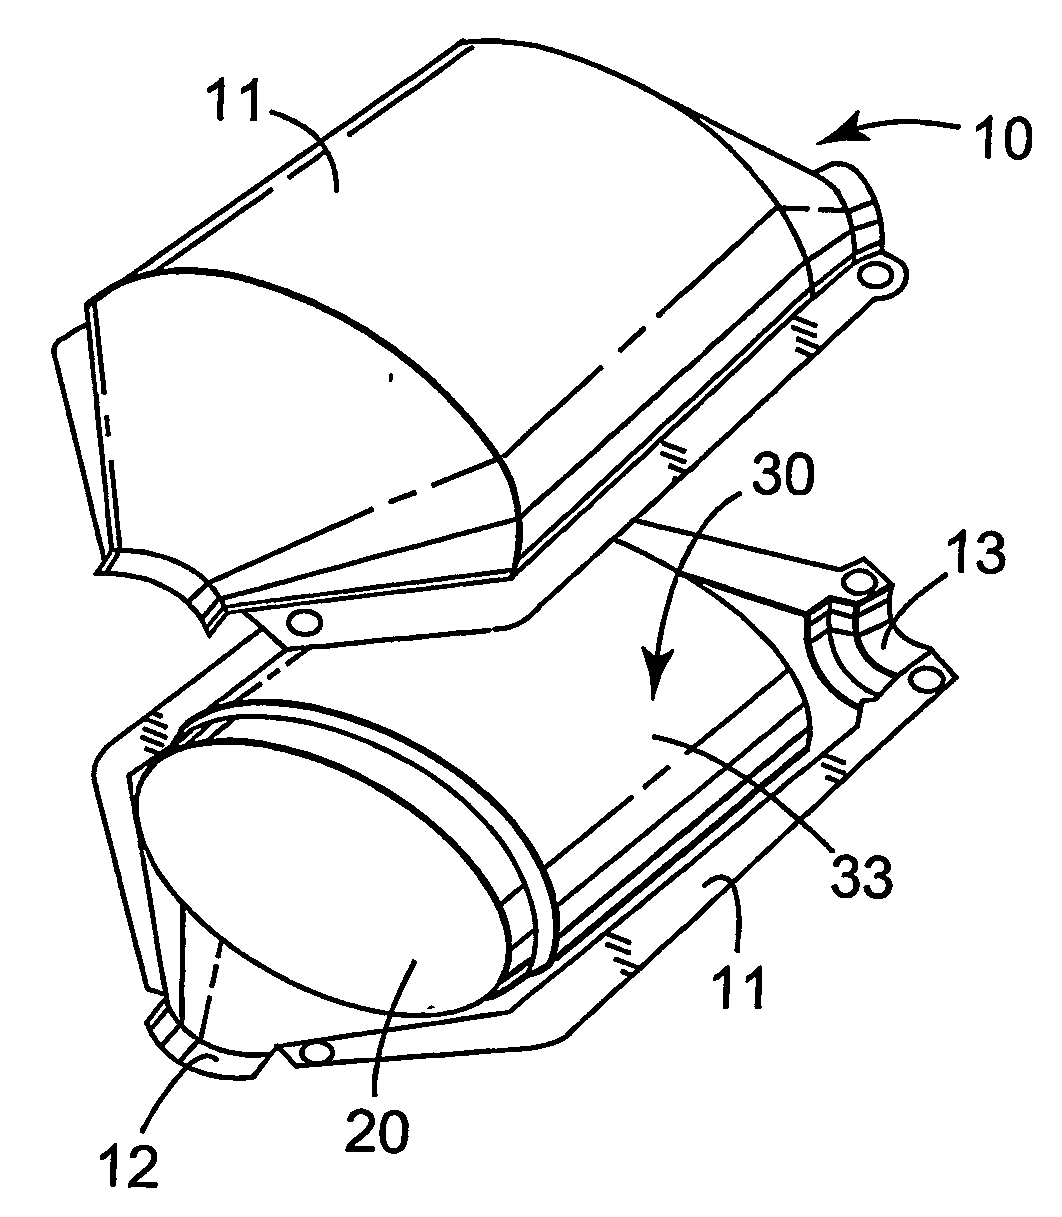 Mounting mat for a catalytic converter